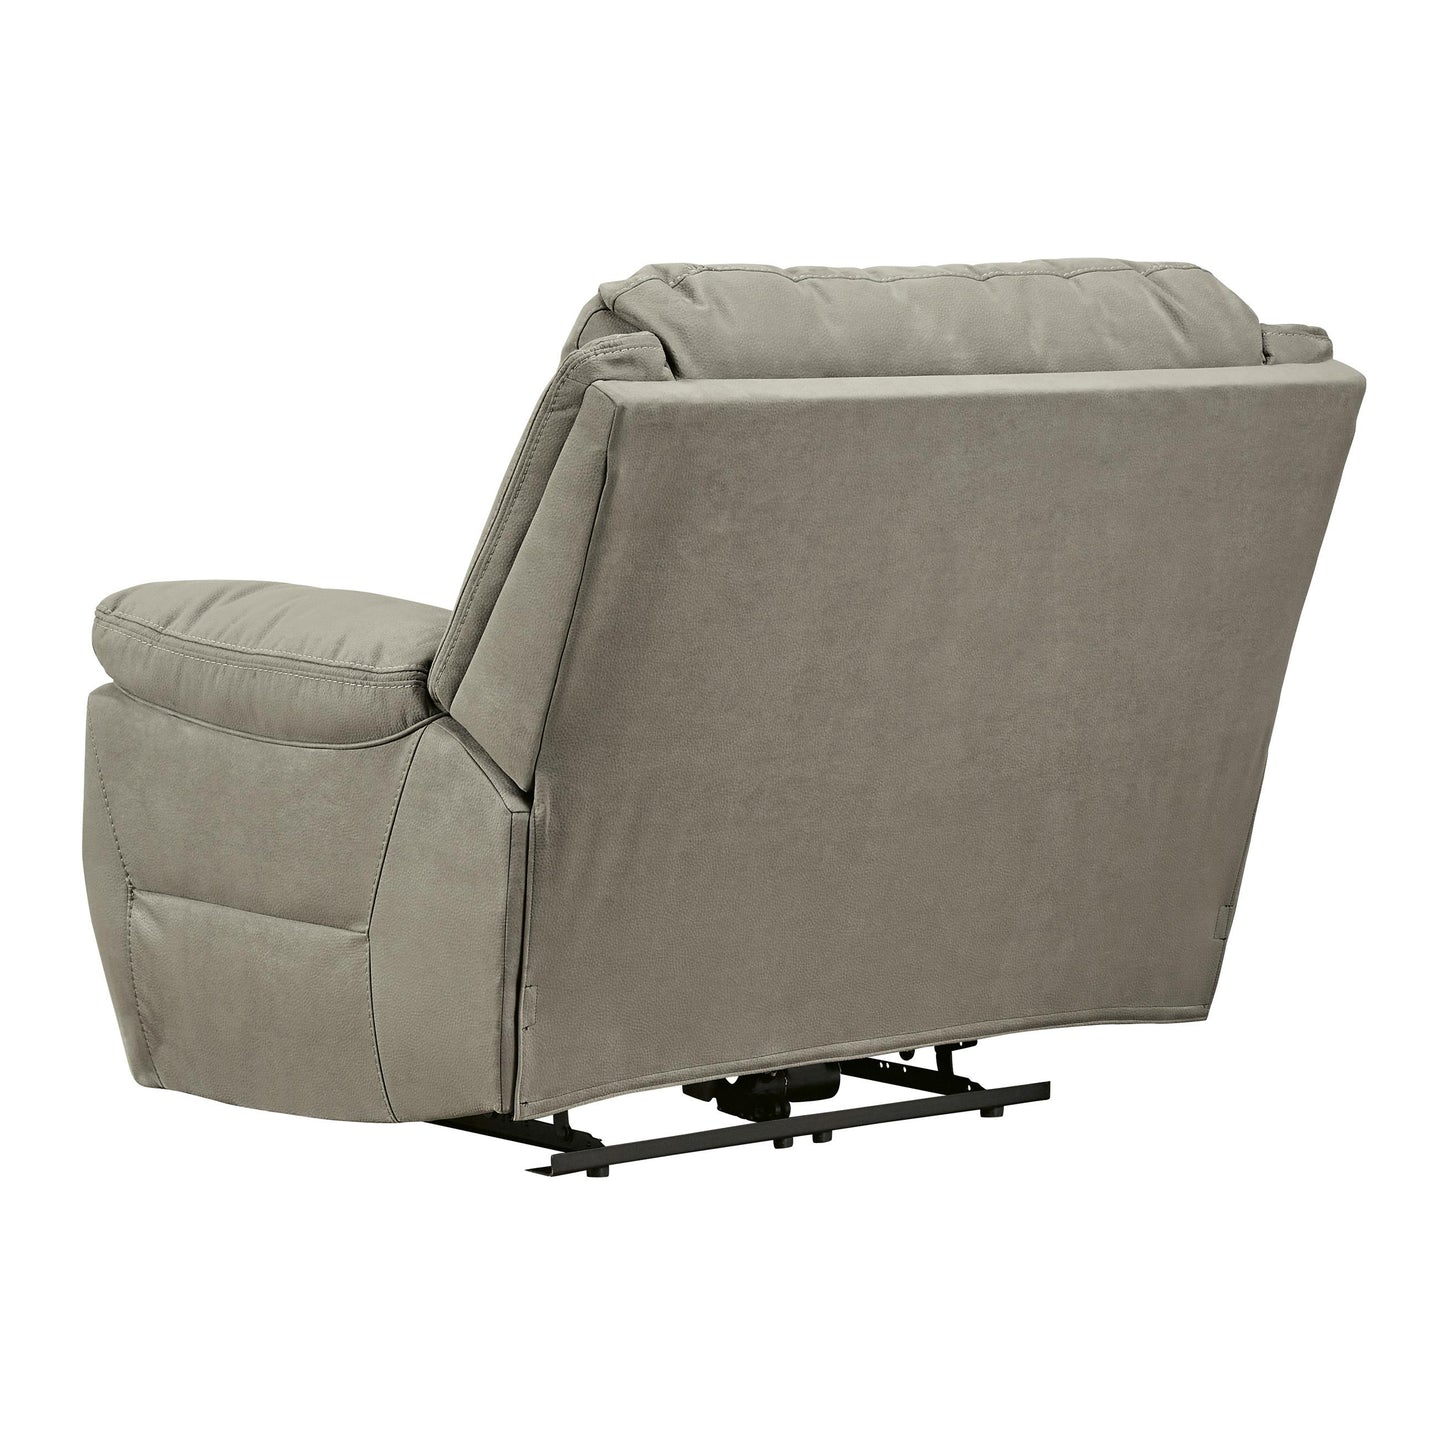 Signature Design by Ashley Next-Gen Gaucho Power Leather Look Recliner with Wall Recline 5420382 IMAGE 5